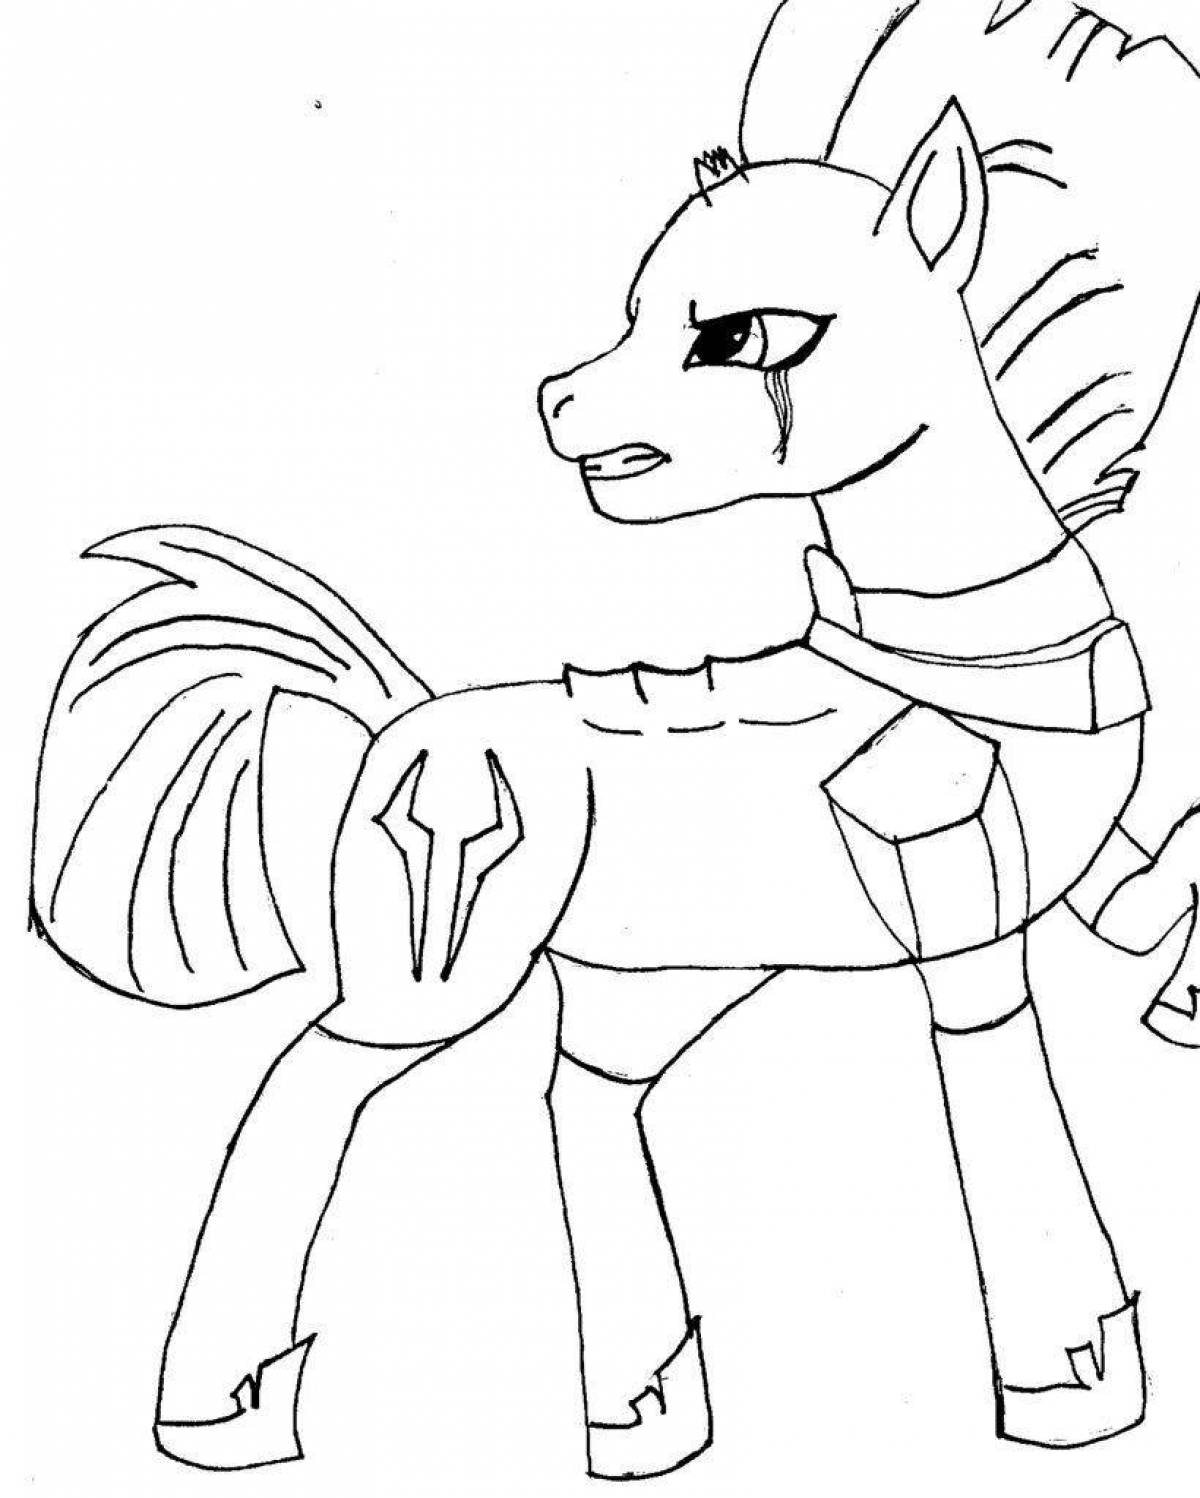 Shiny Storm Pony Coloring Page